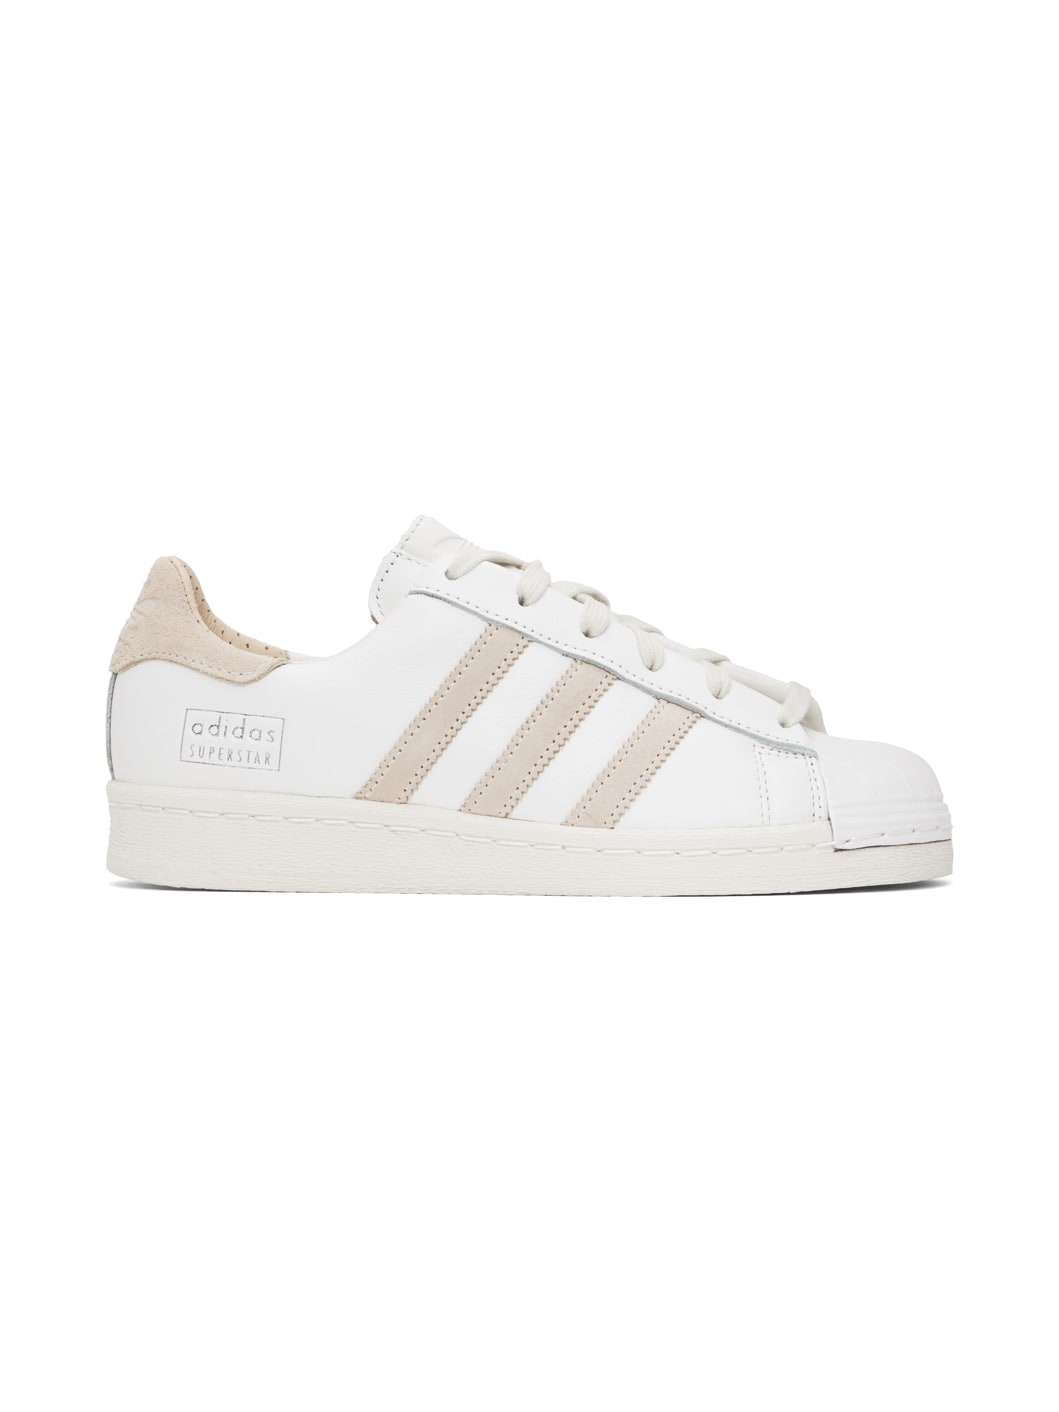 Off-White Superstar Lux Sneakers - 1